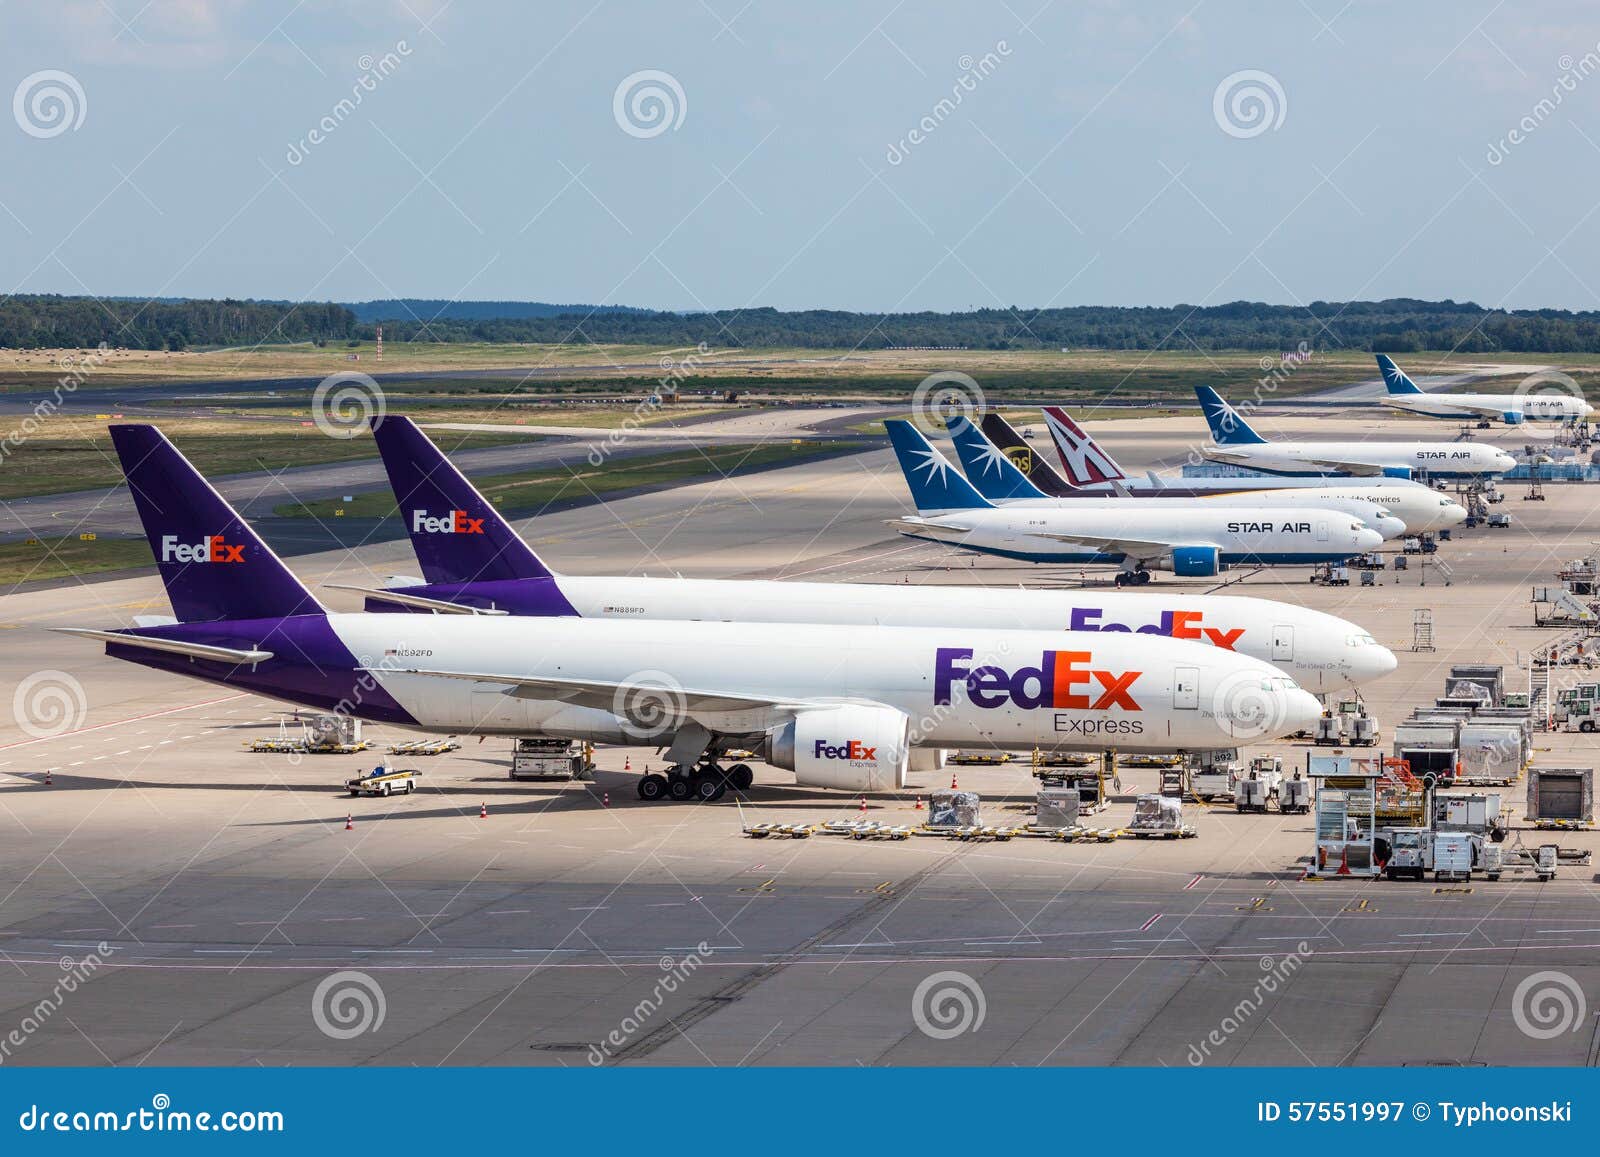 Image result for fedex at the airport